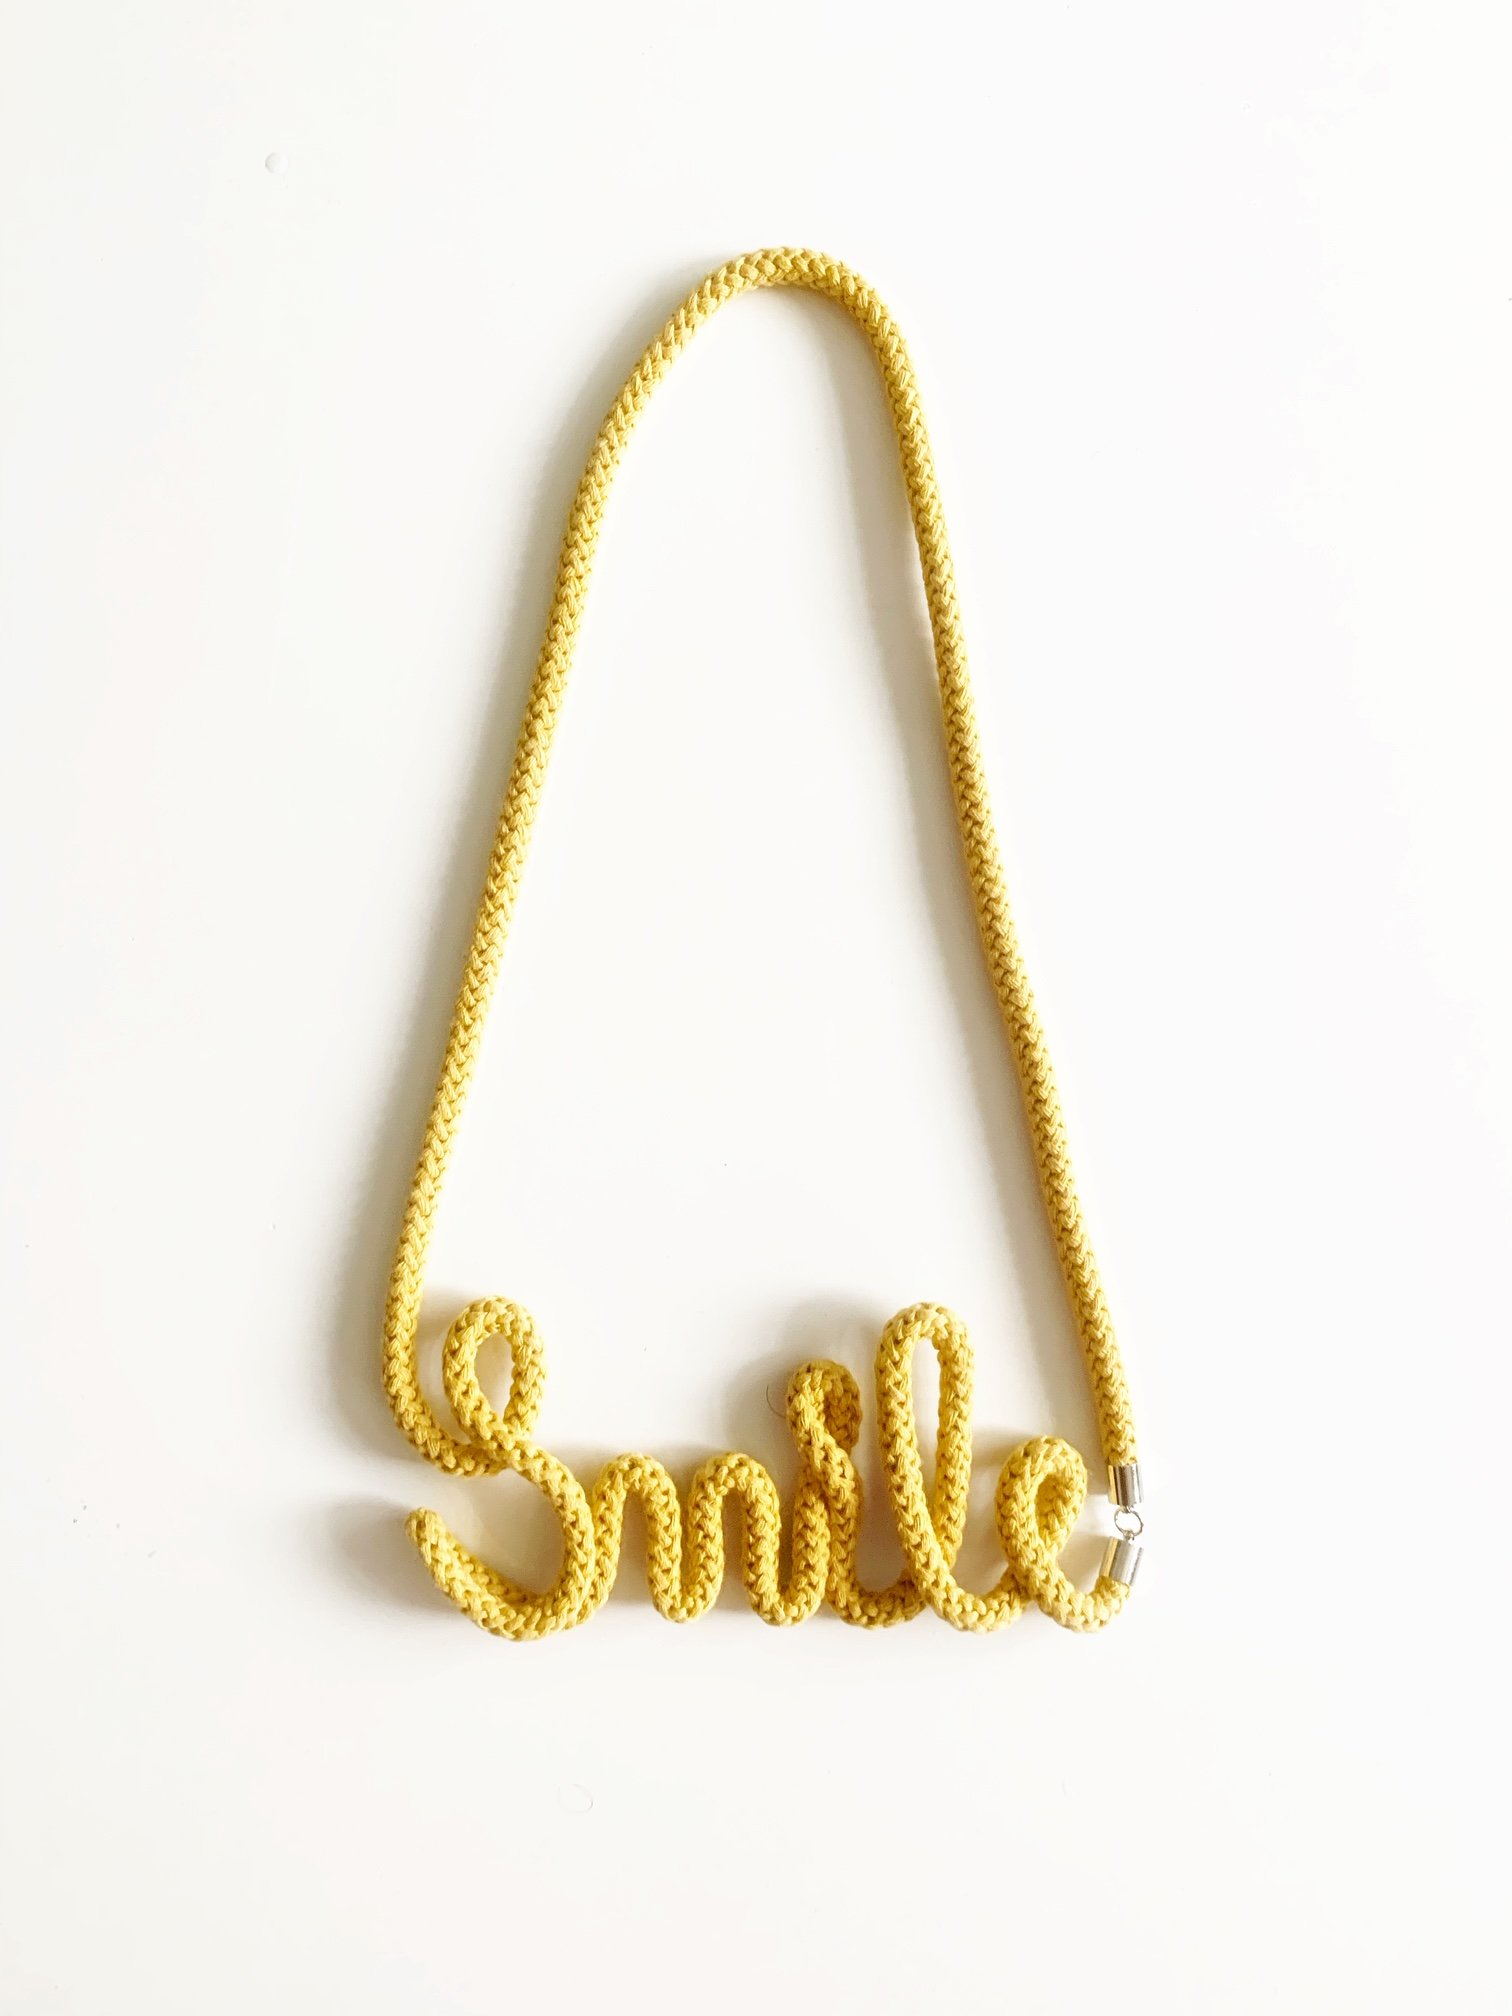 Smile Necklace – Handmade by Tinni